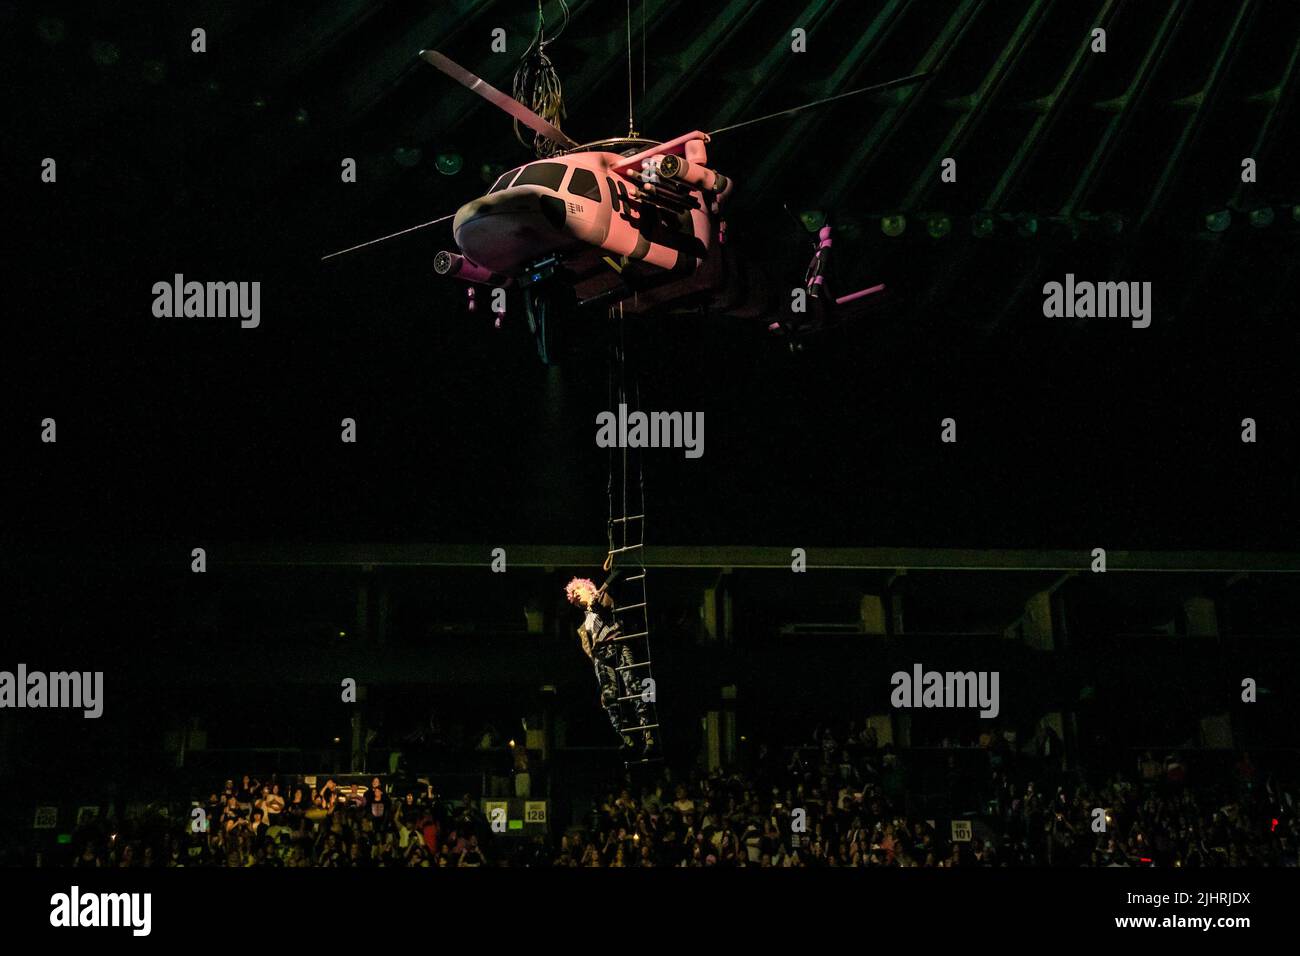 Machine Gun Kelly performs during the The Mainstream Sellout Tour at Oakland Arena on July 19, 2022 in Oakland, California. Photo: Chris Tuite/imageSPACE/Sipa USA Stock Photo